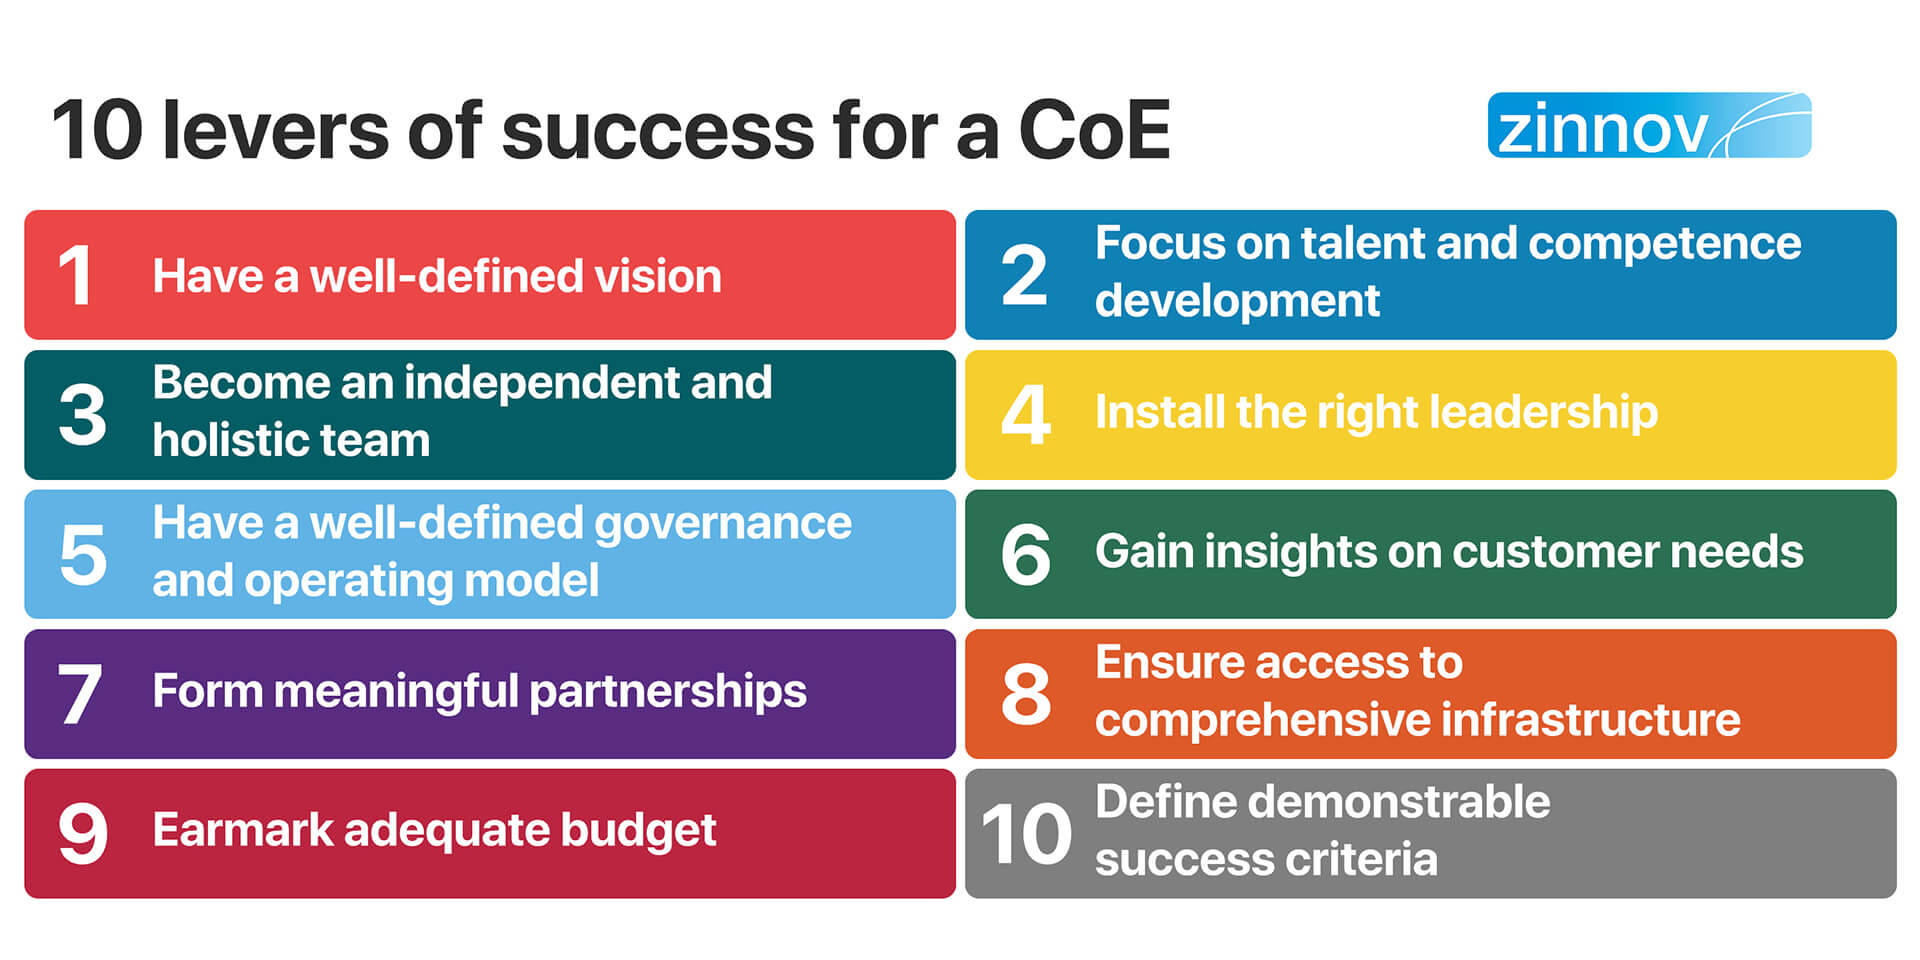 10 Levers Of Success for a COE